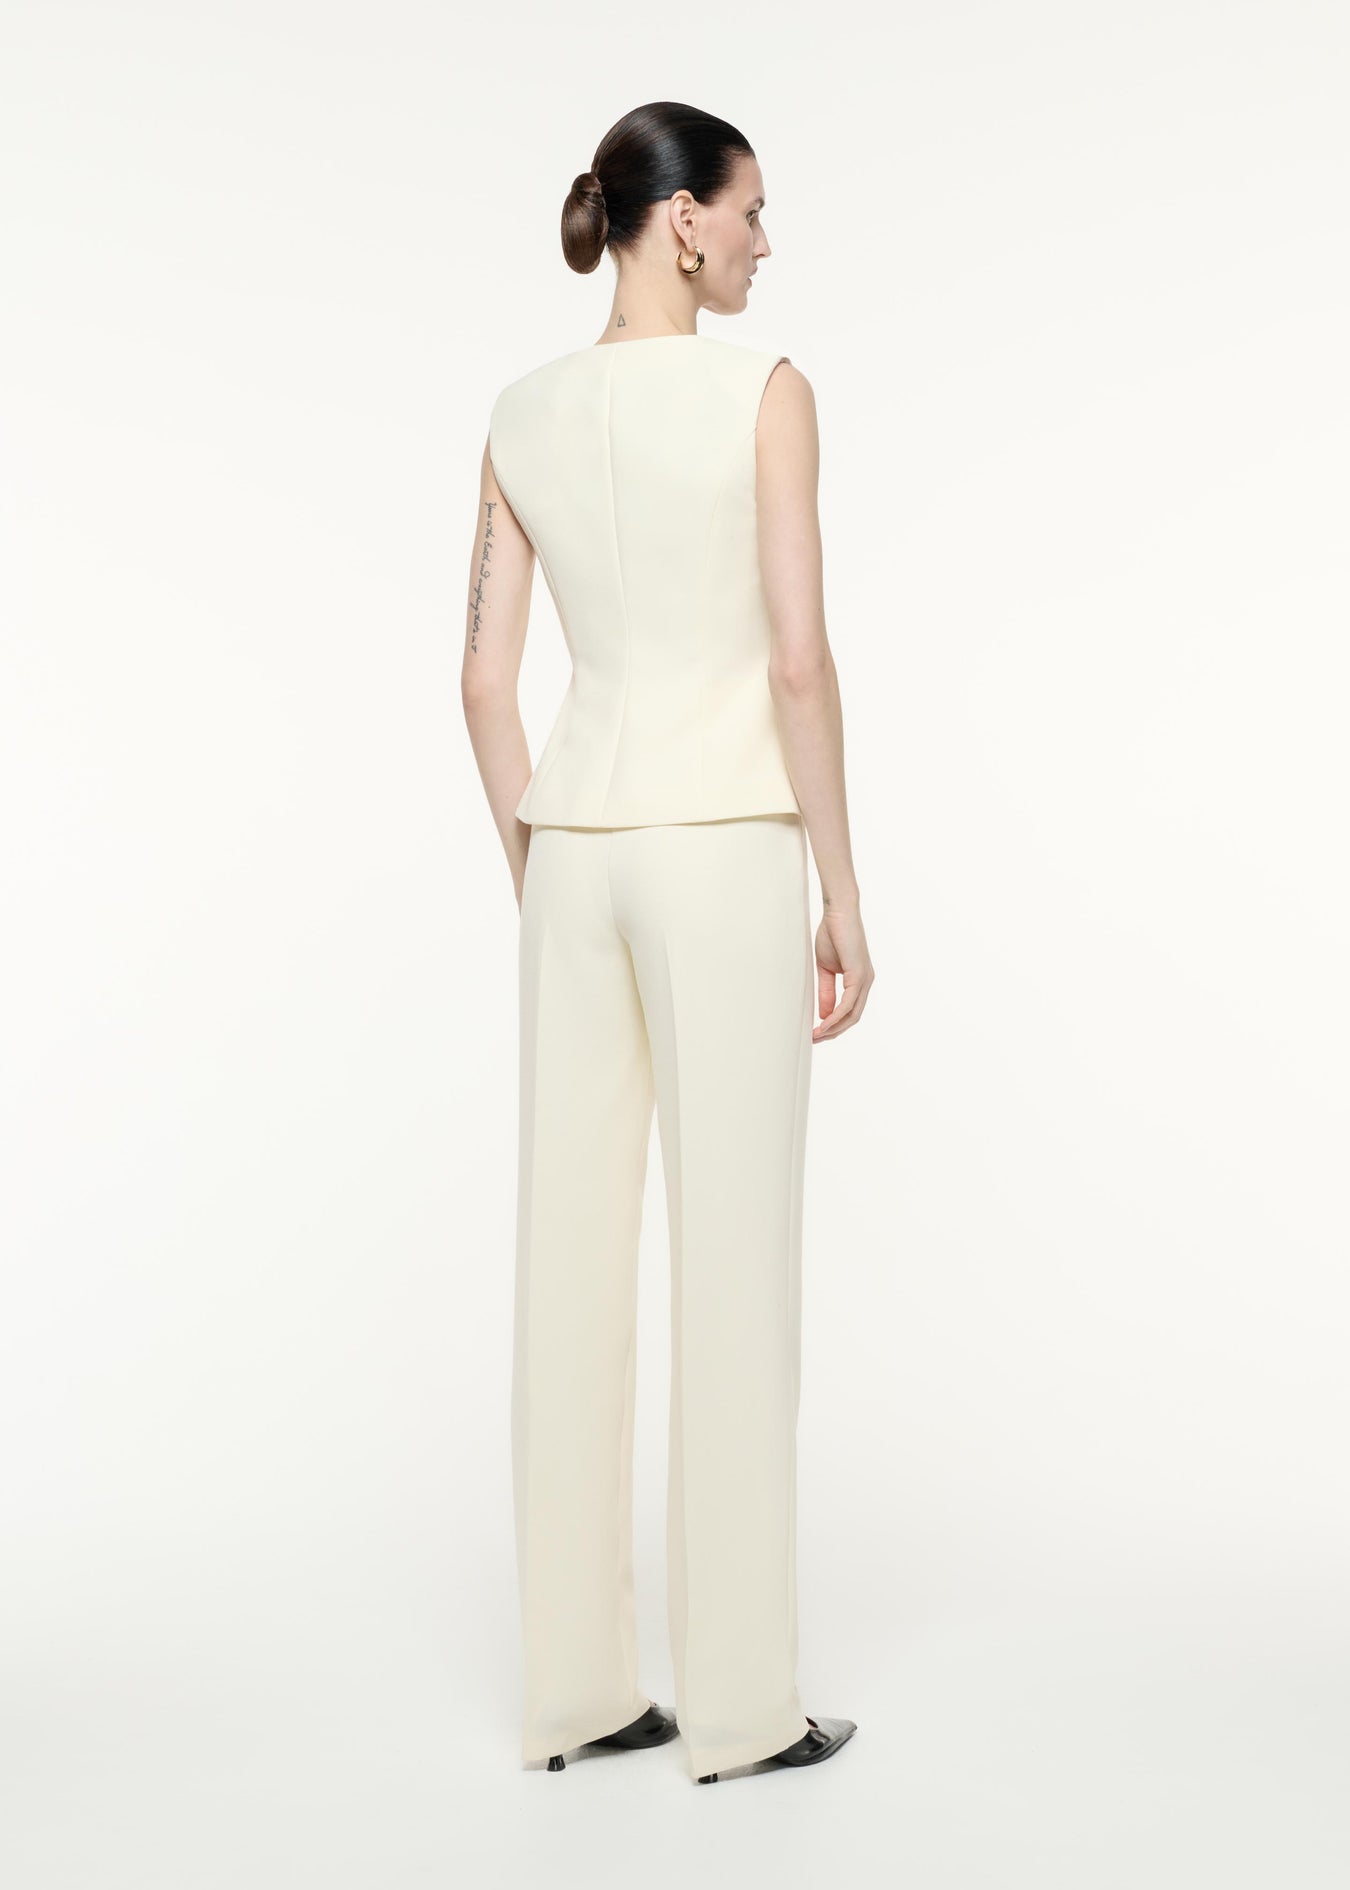 A back view image of a model wearing the Crepe Trouser in Cream